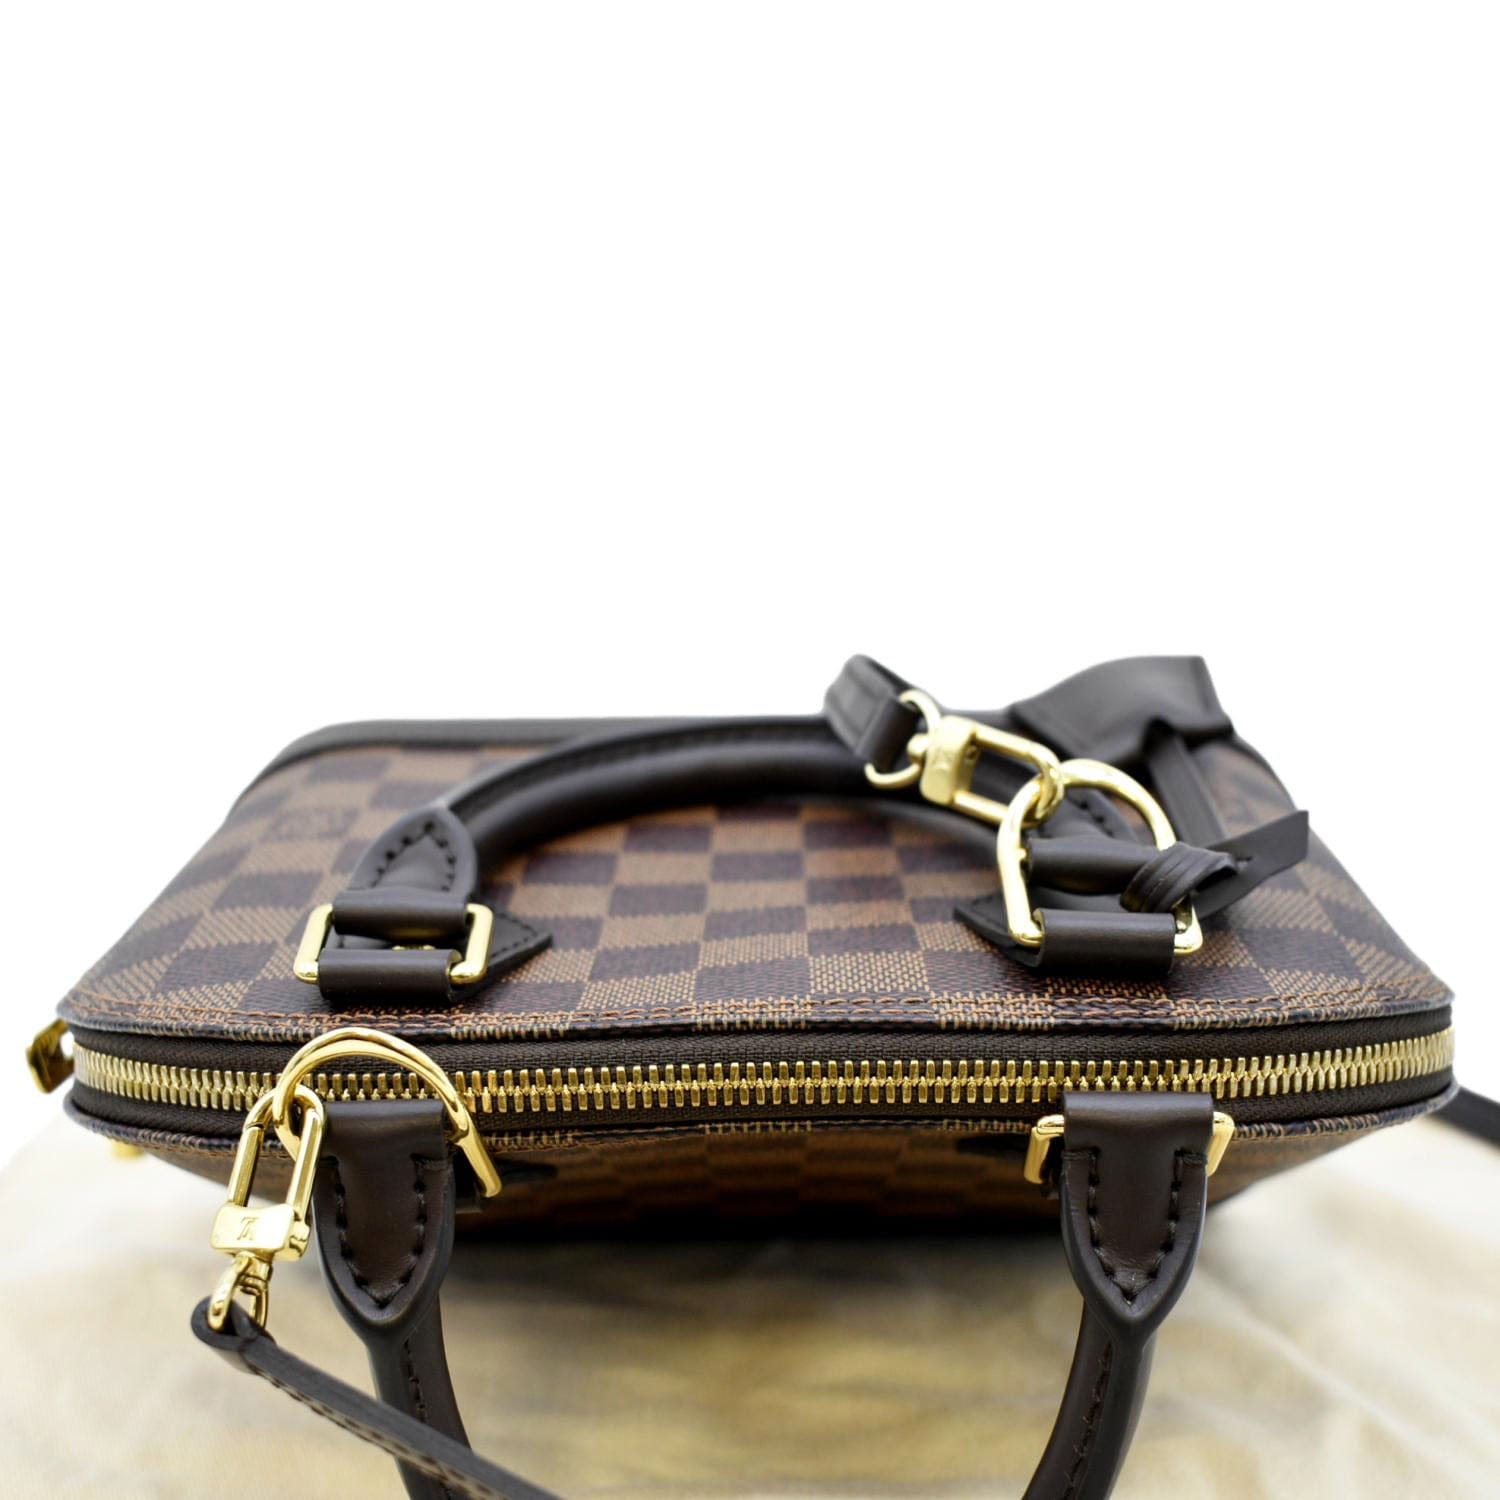 Louis Vuitton ALMA BB Attention to DETAILS Authentic Damier Ebene Cross and  Body Bag PearlYao 